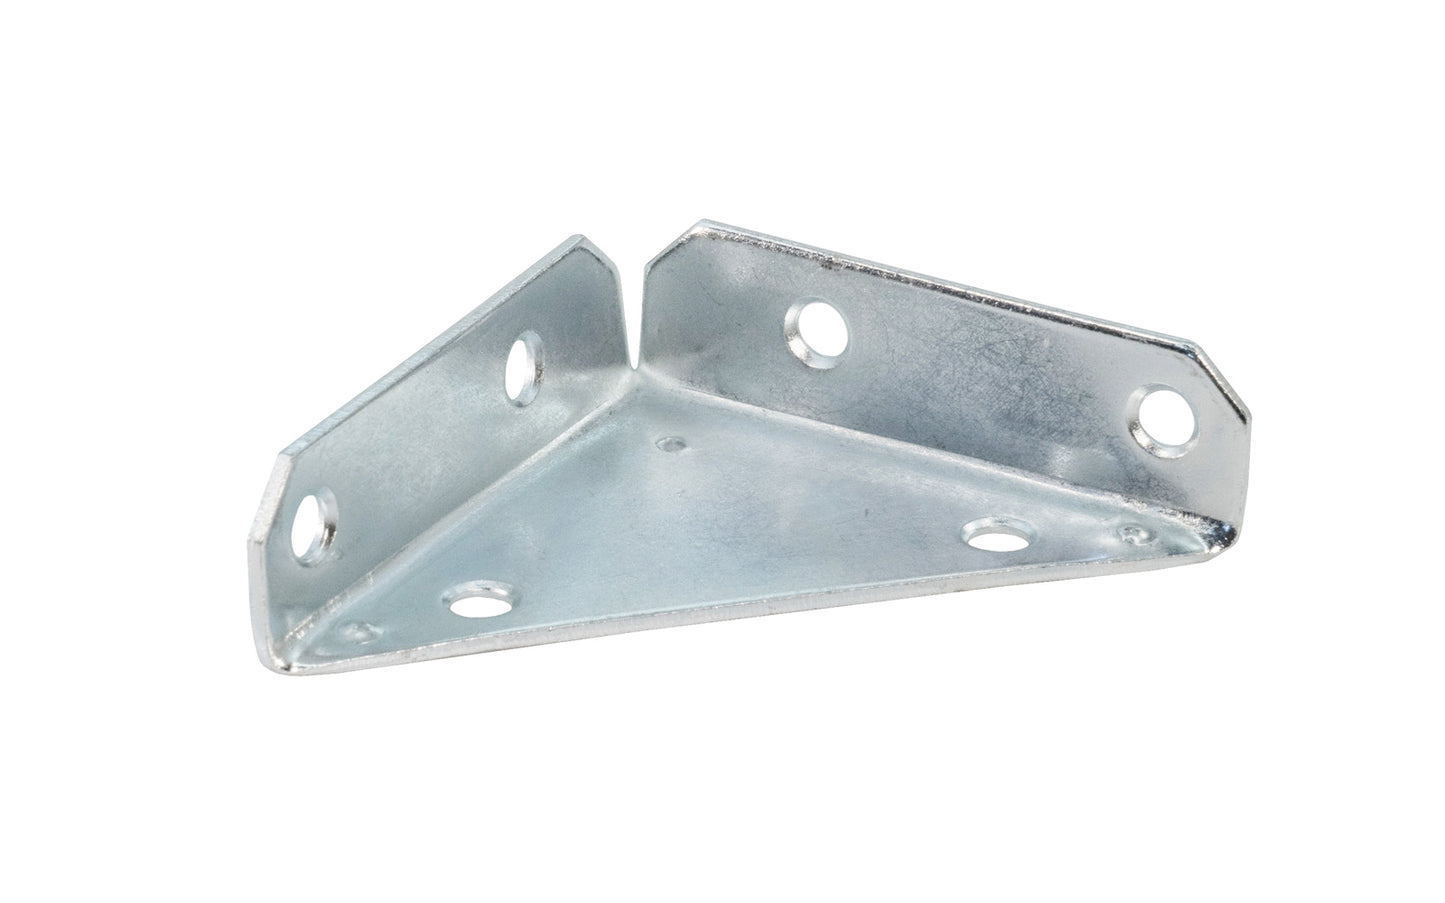 These corner braces with a backplate are designed for furniture, cabinets, shelving support.Allows for quick & easy repair of items in the workshop, home, & other applications. Made of steel material with a zinc plated finish. Countersunk holes. Sold as singles. Available in 2", 3", & 4" sizes. Screws not included.